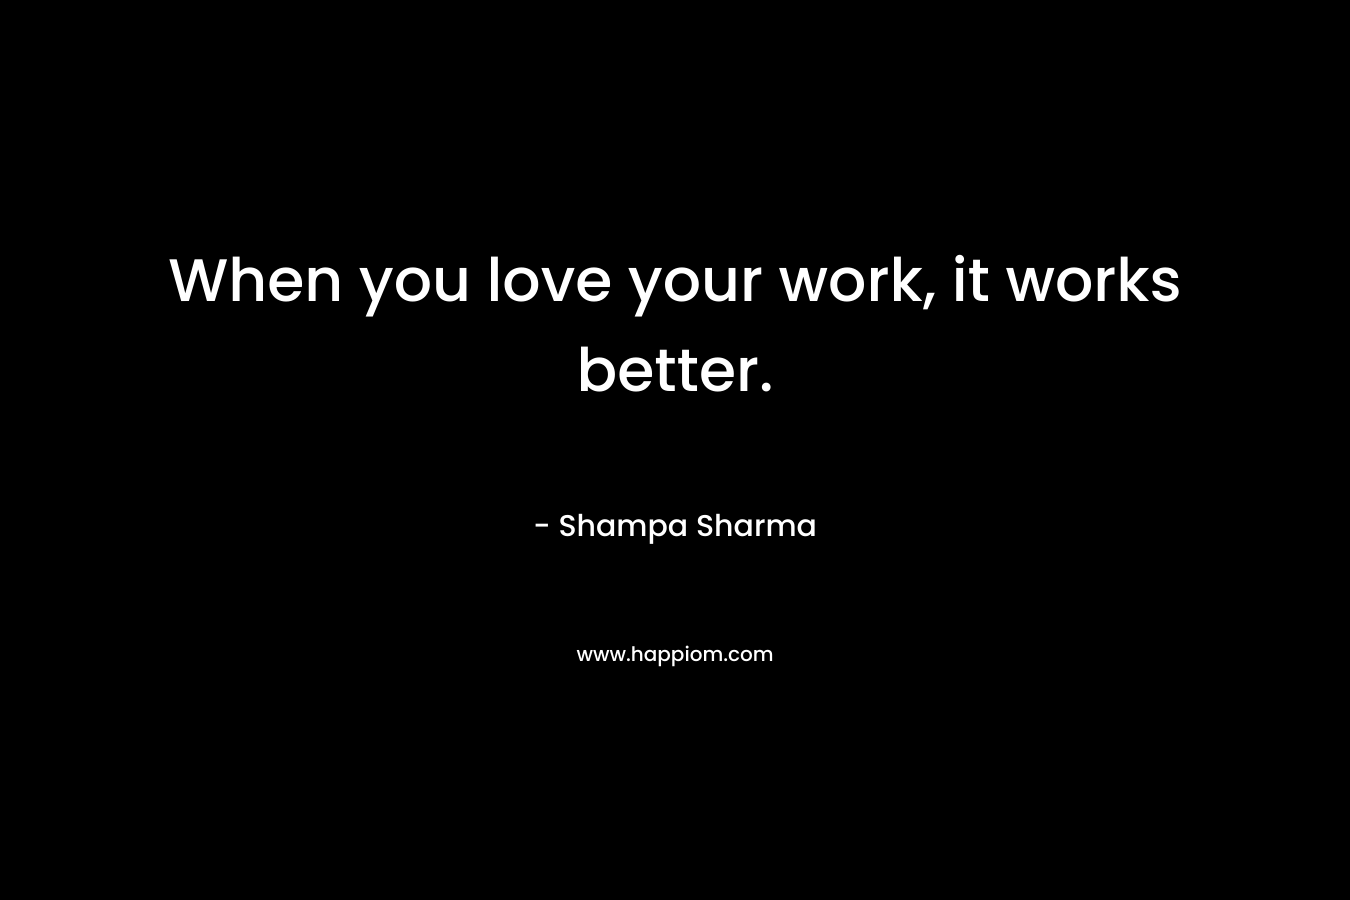 When you love your work, it works better. – Shampa Sharma